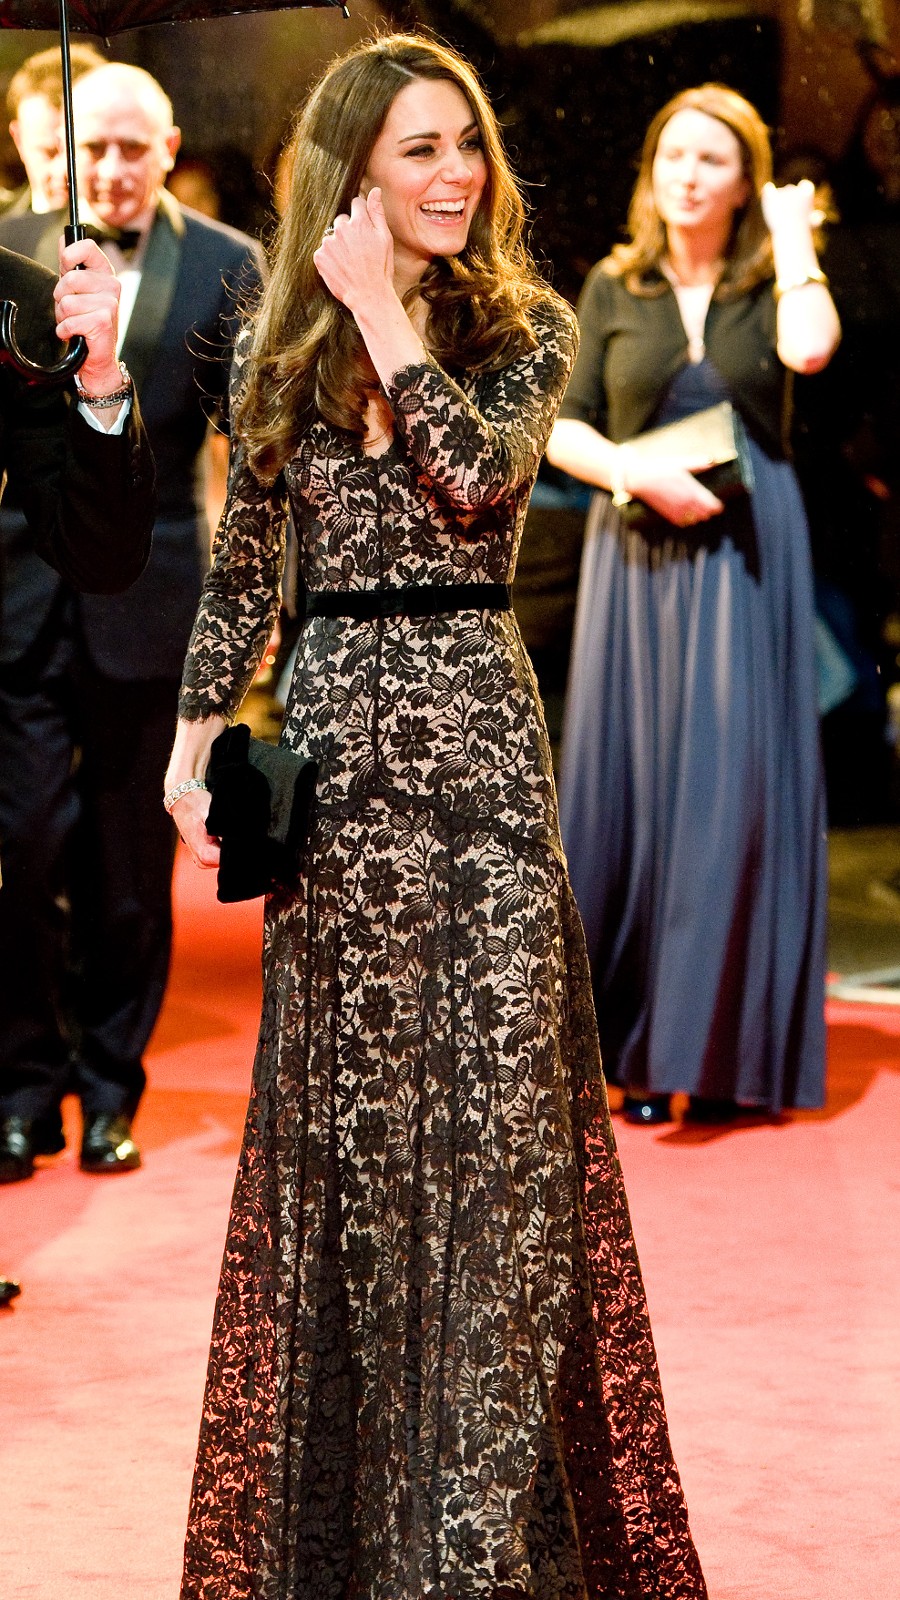 Kate Middleton's pre-birthday black lace and nude look | Woman & Home